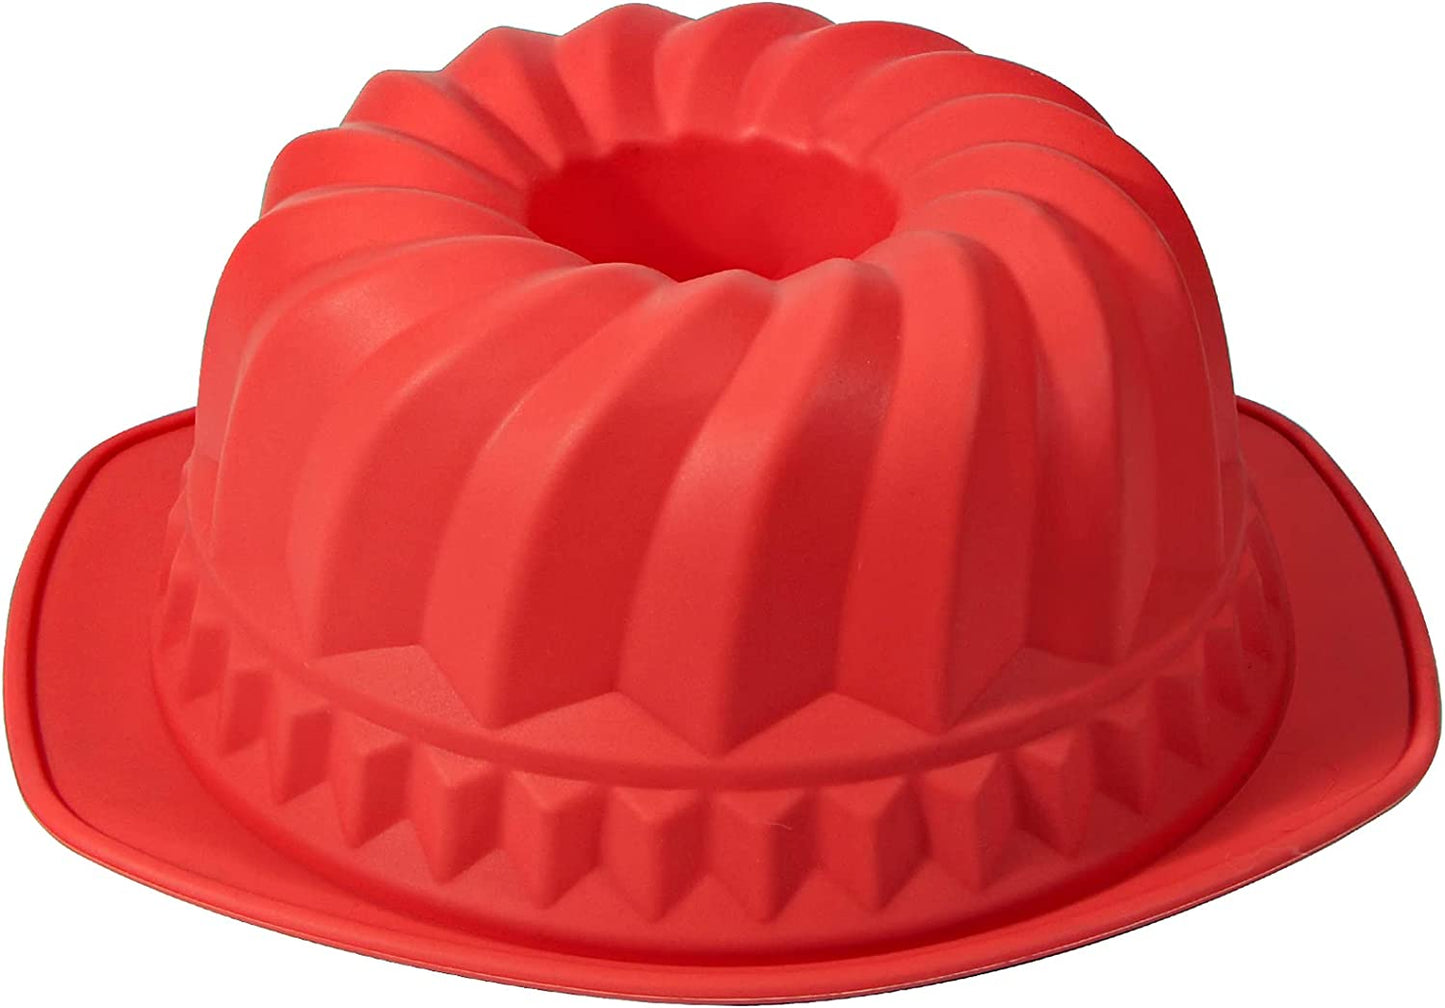 Dropship 9 Silicone Bundt Cake Pan Baking Pans Cake Molds Non-Stick Silicone  Baking Molds With Metal Reinforced Frame More Strength Oven Safe to Sell  Online at a Lower Price